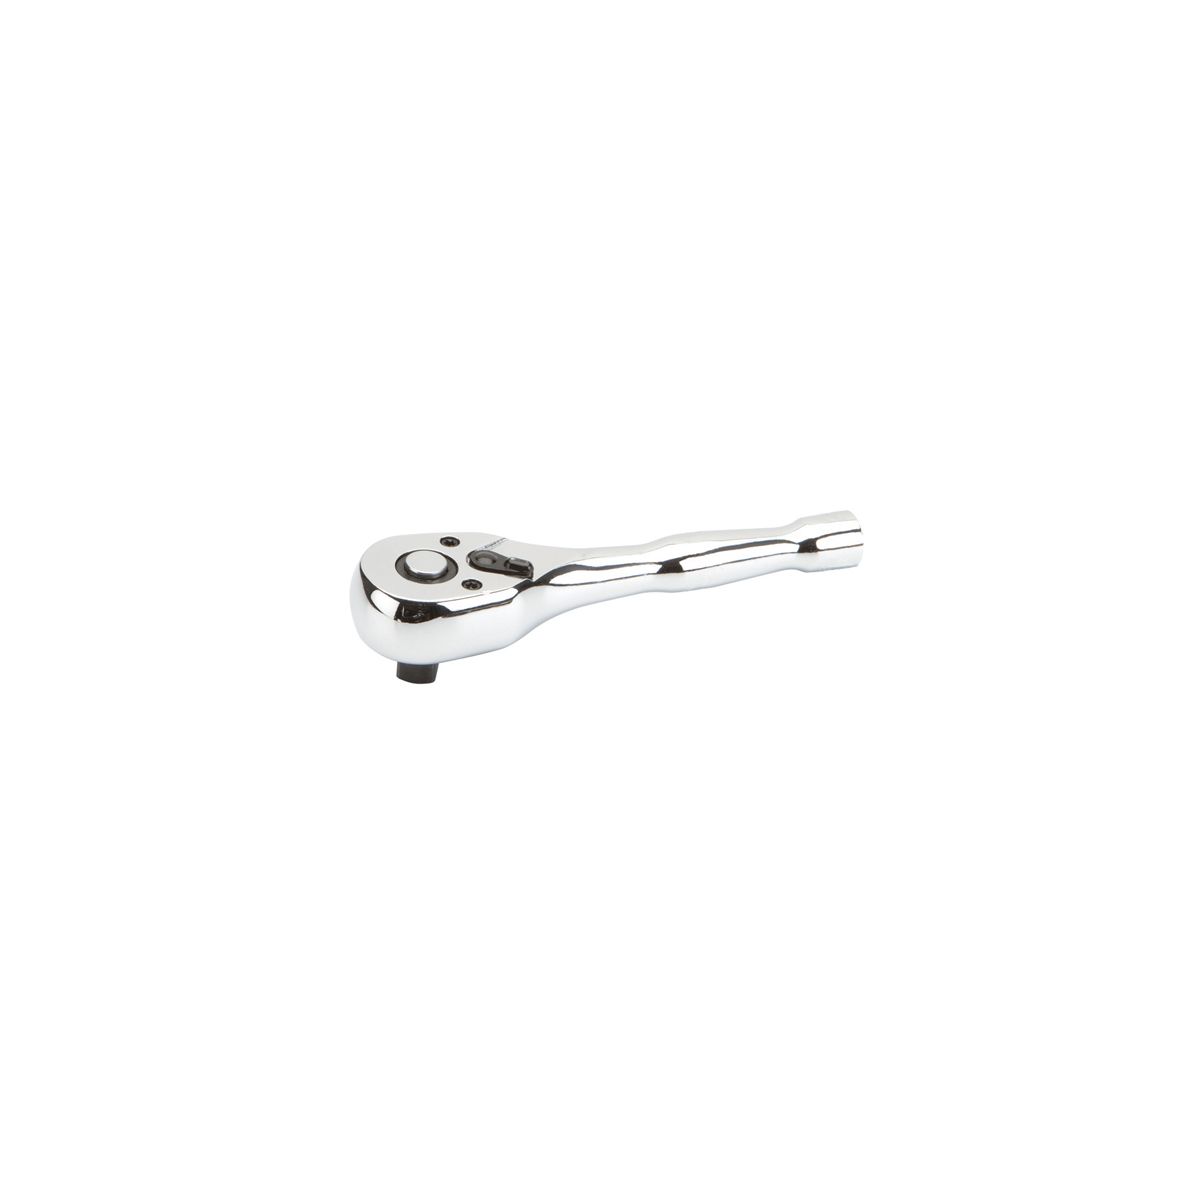 PITTSBURGH PRO 1/4 in. Drive Quick Release Stubby Ratchet